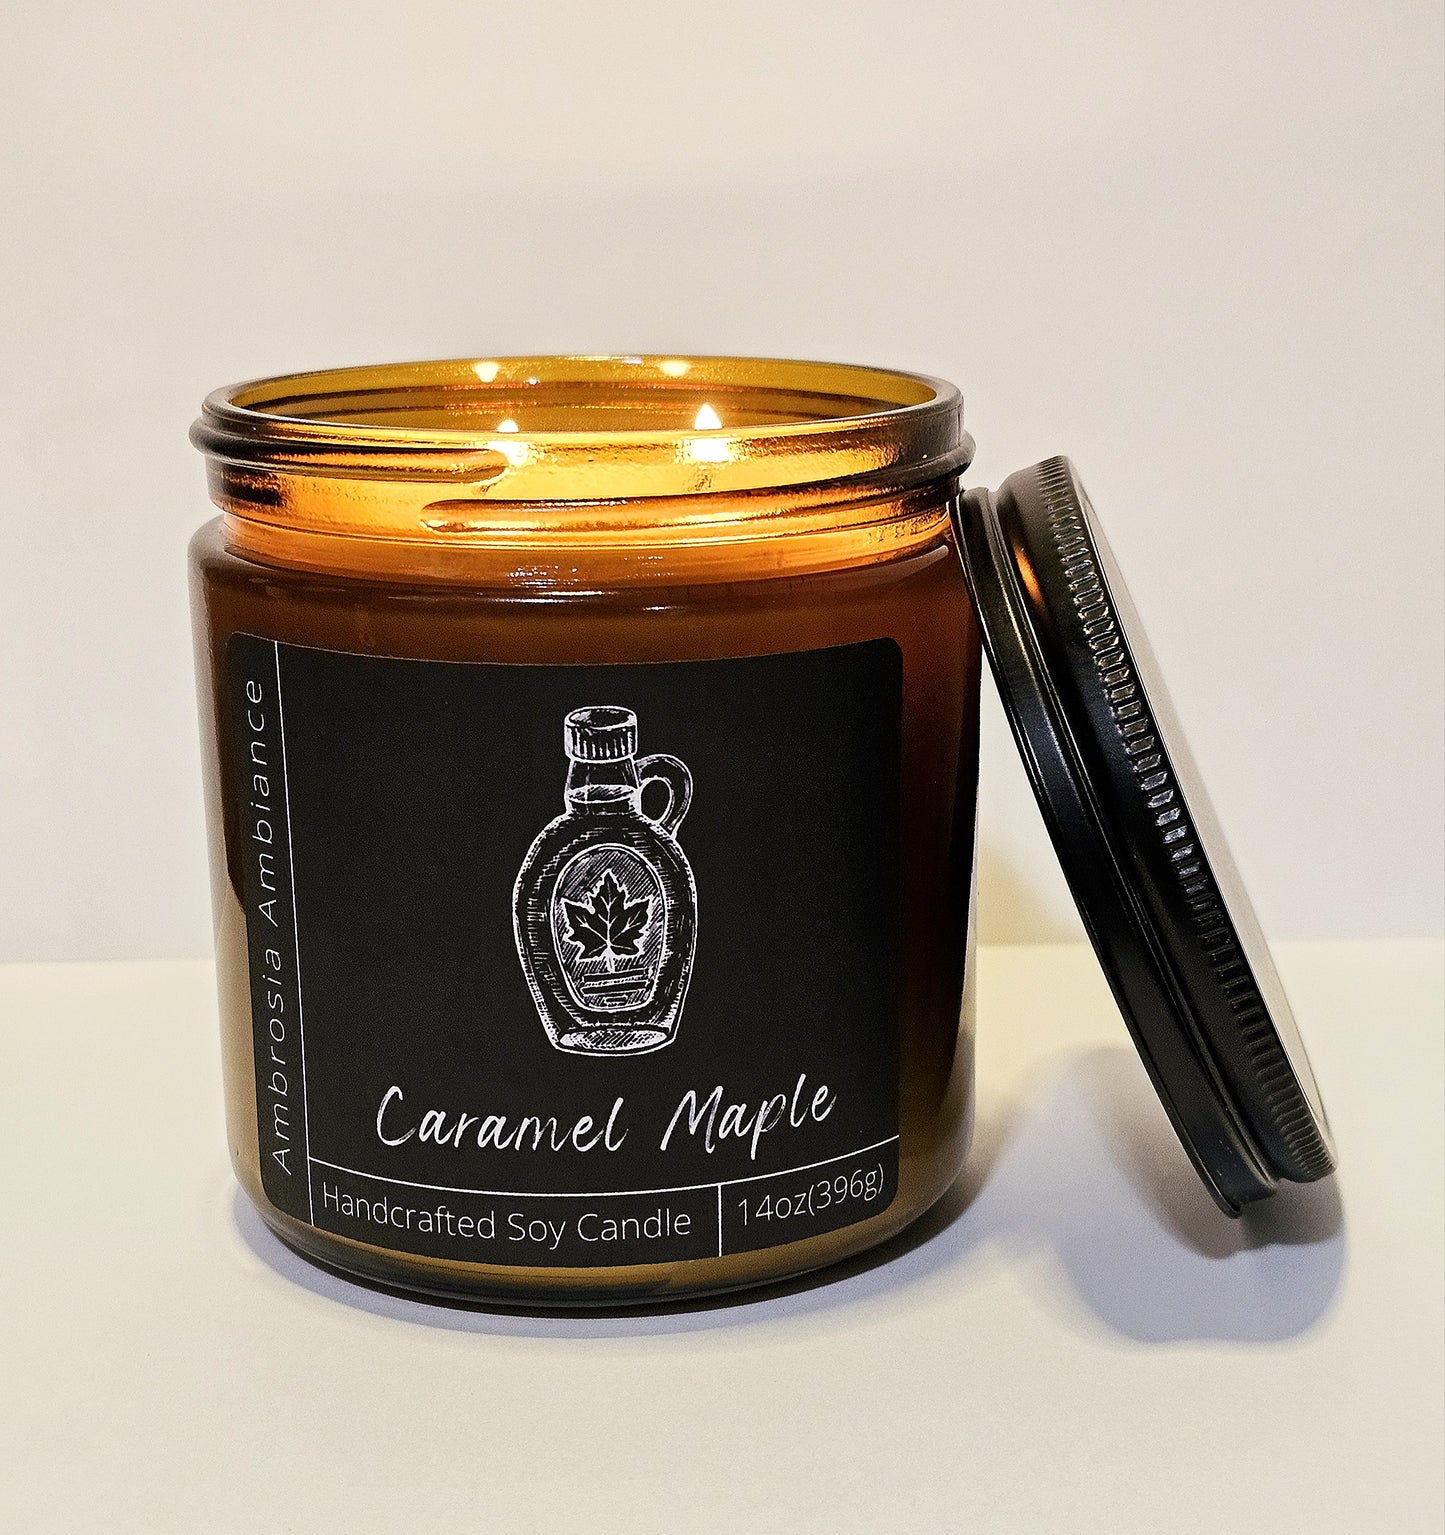 Caramel Maple | Soy Wax Candle